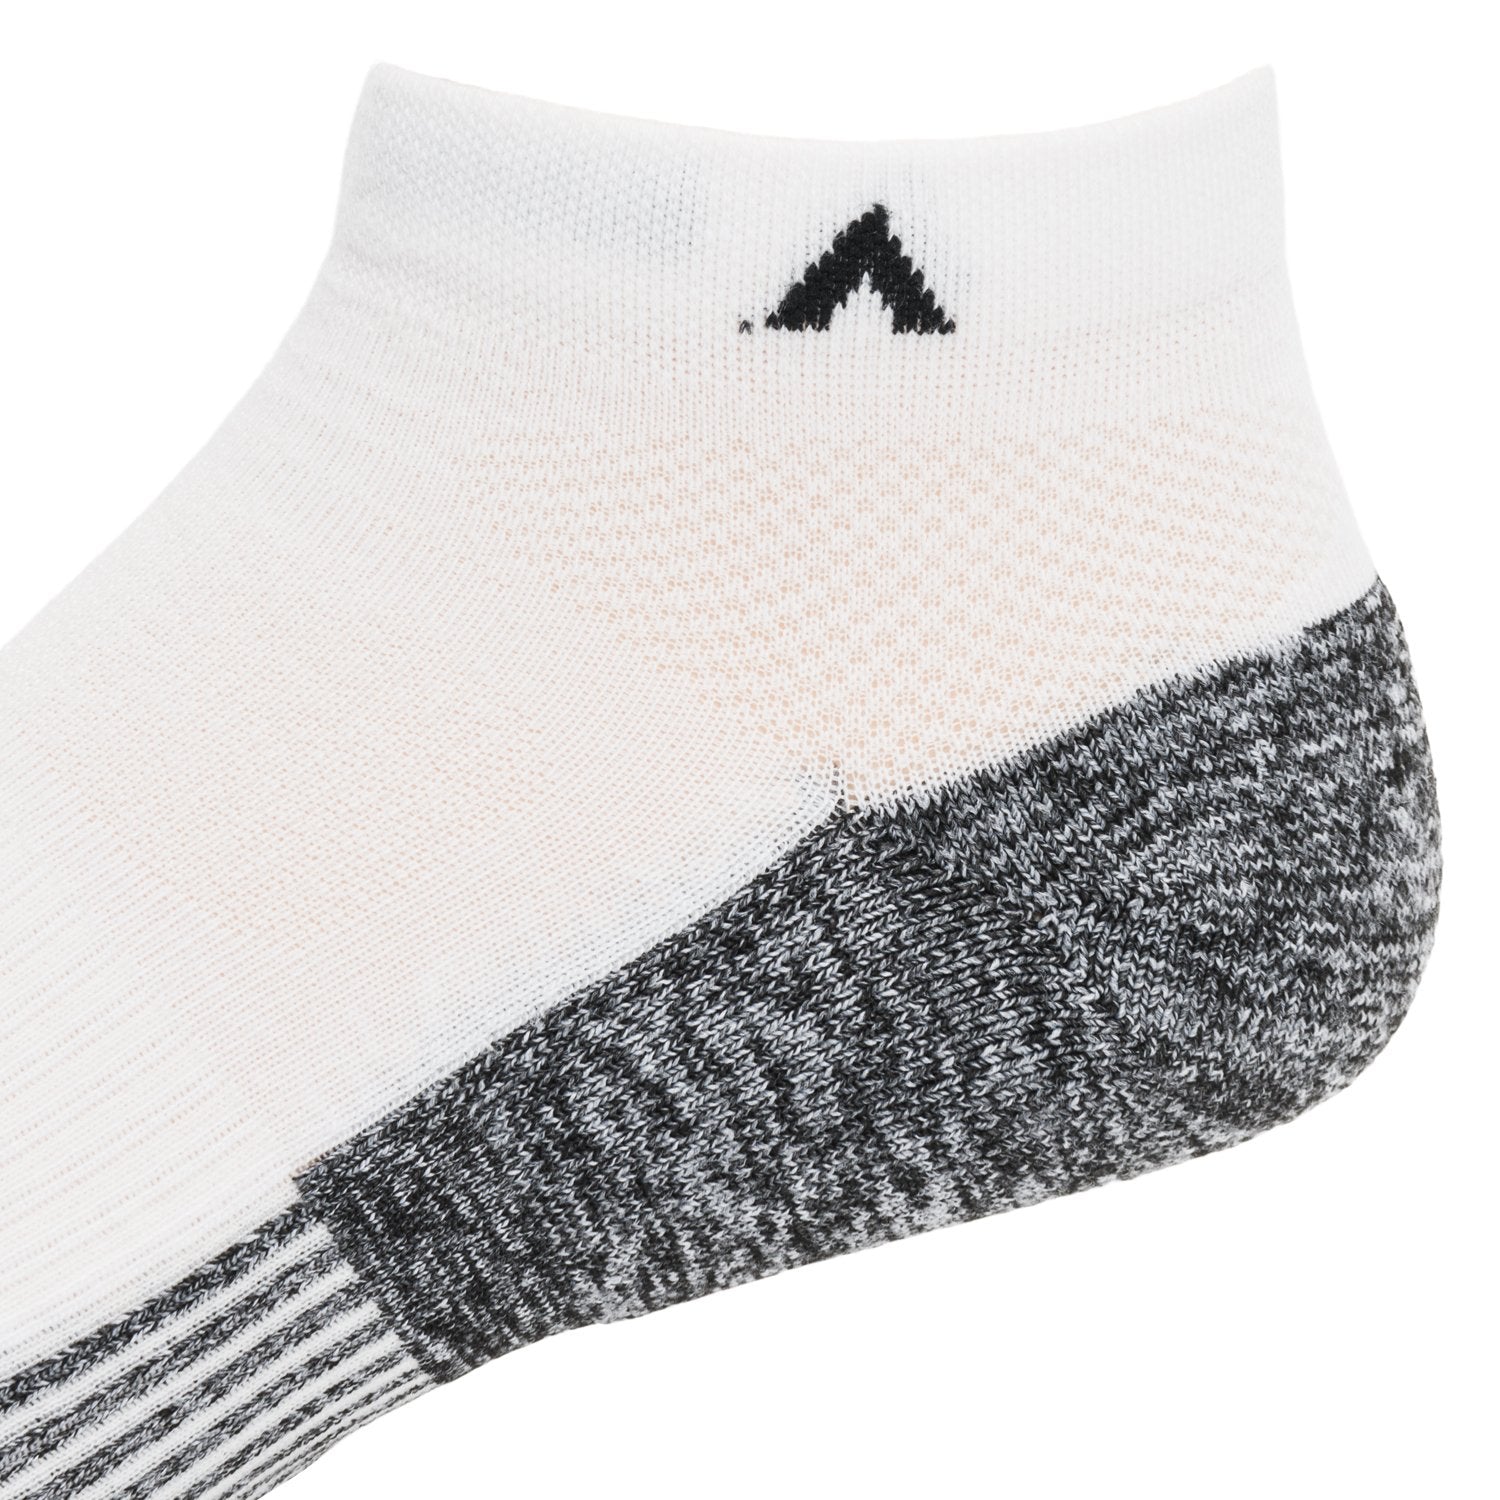 Attain Lightweight Low Sock - White heel and cuff perspective - made in The USA Wigwam Socks